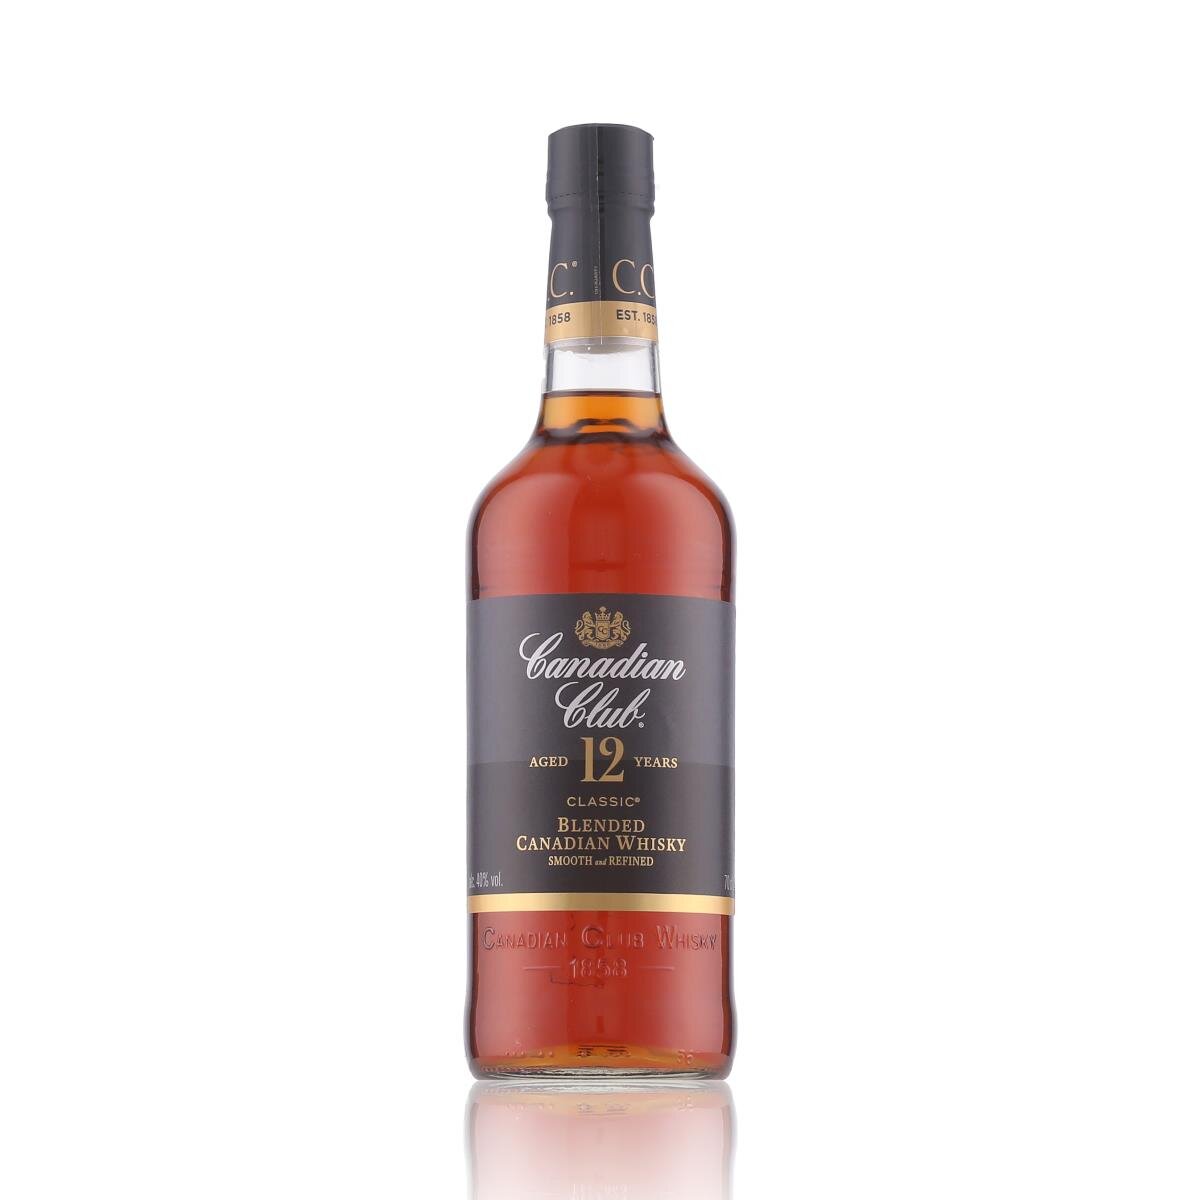 Canadian Club 12 Years Blended Canadian Whisky 40% Vol. 0,7l, 23,89 €